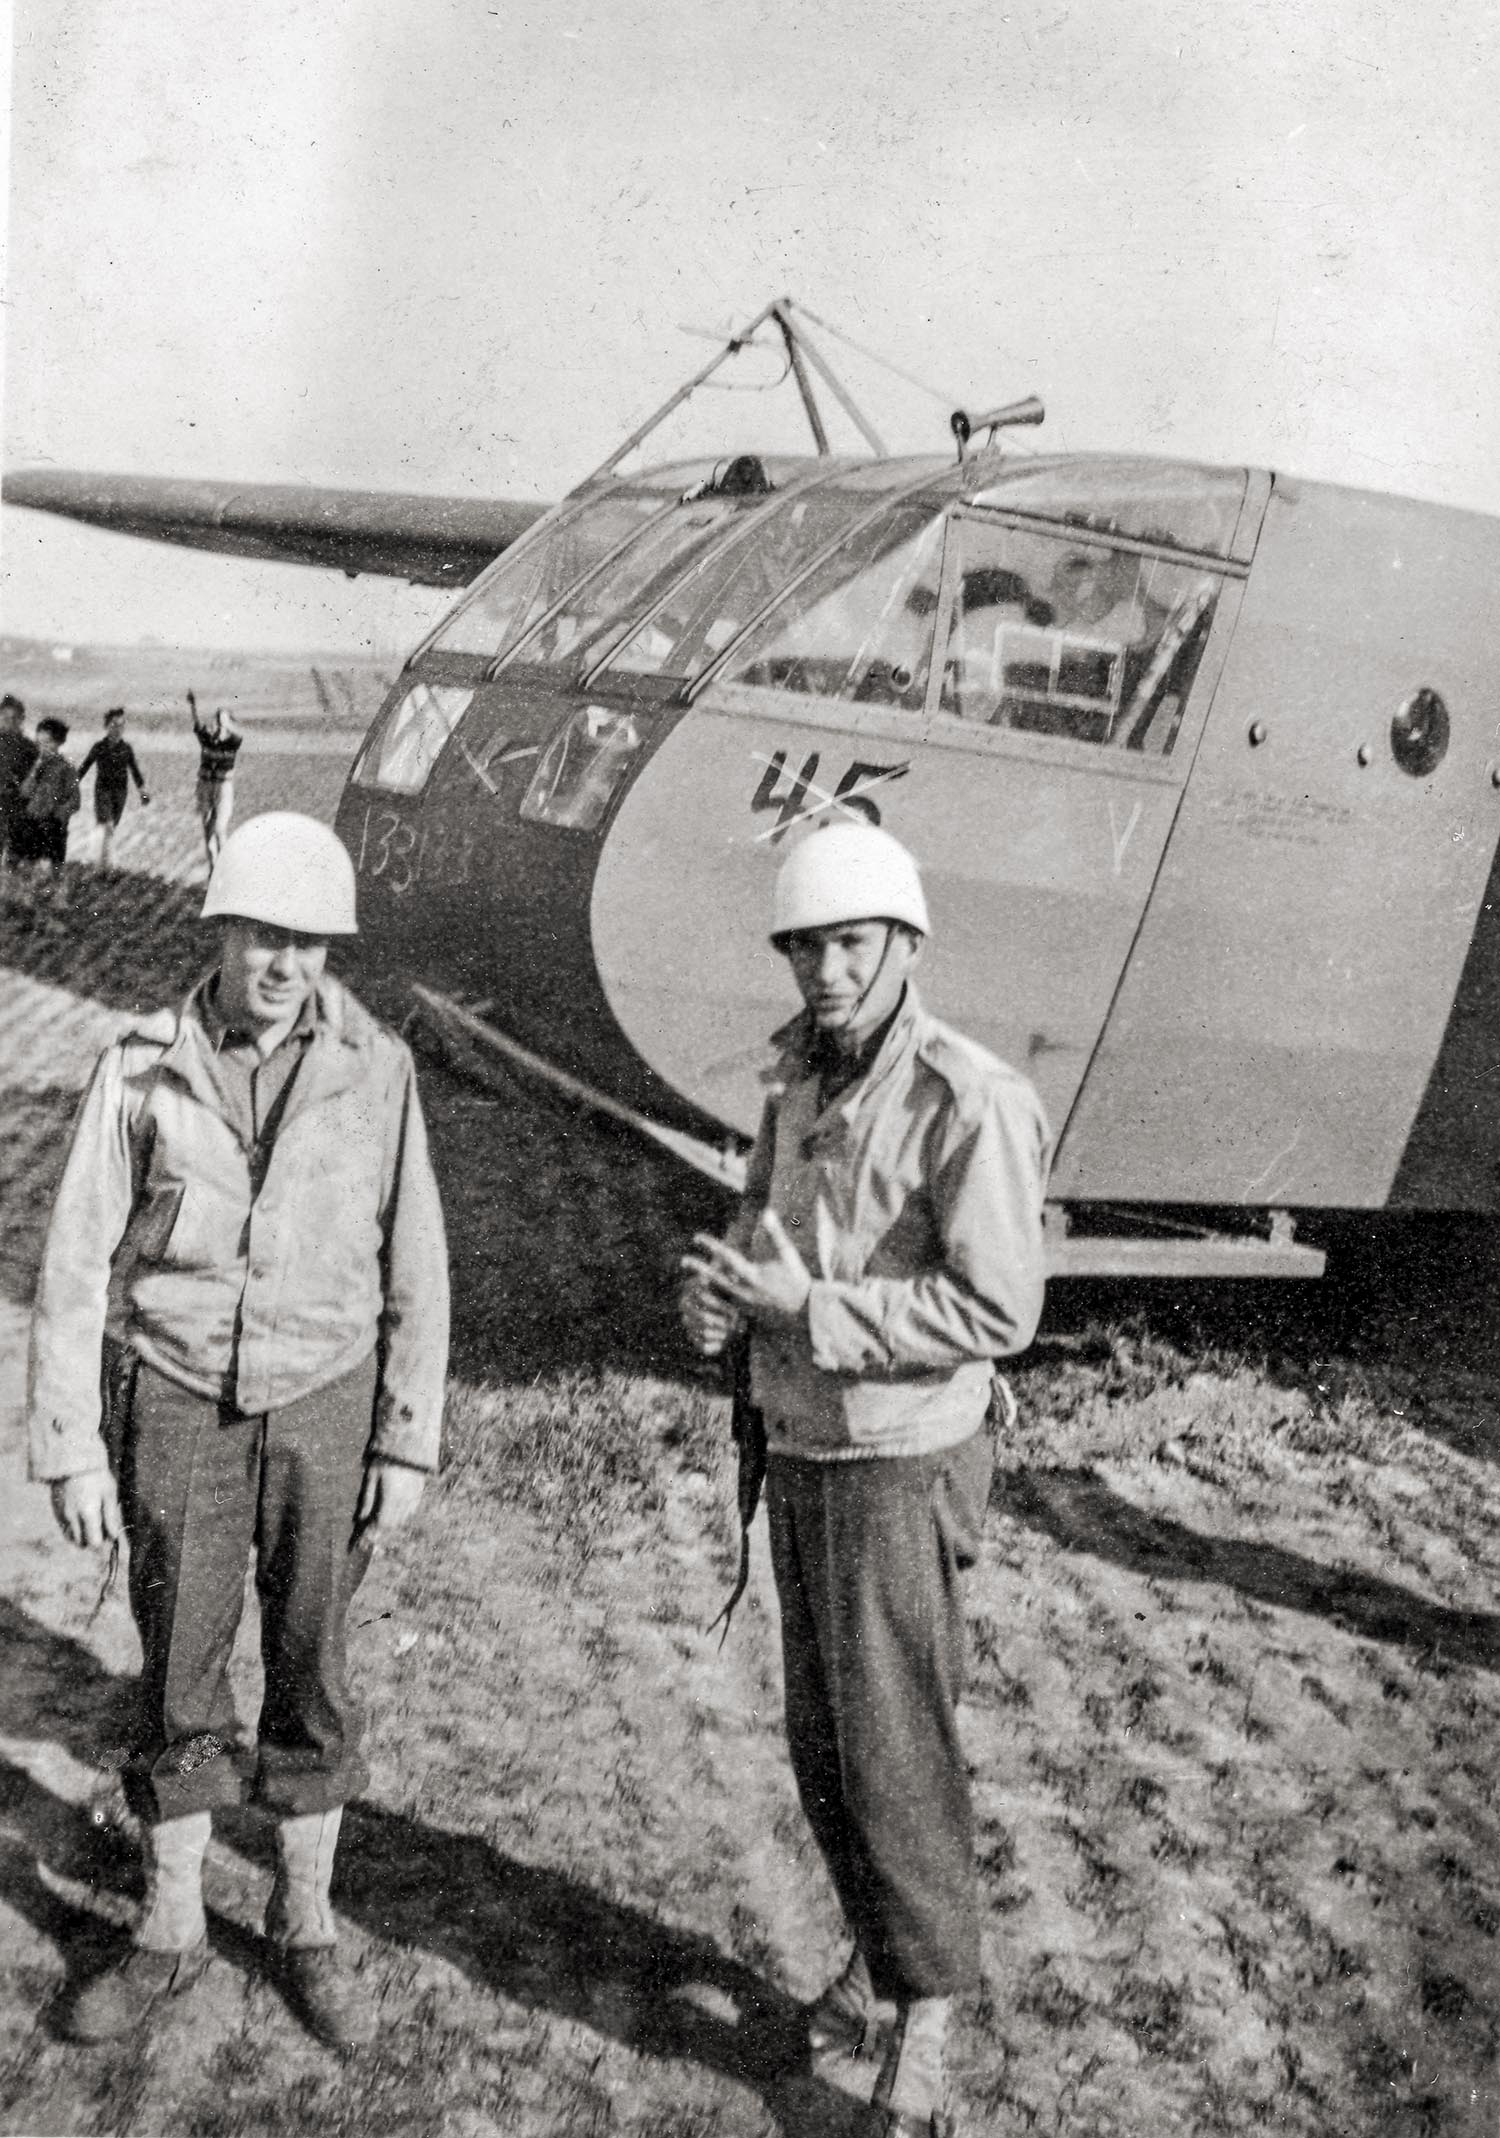 This is a found photo. Written on back: "March 1945. Dexter Nunley, T5 and myself on guard at a disabled glider that put down near our camp at Lasne-Chapelle - Saint Lambert, Belgium. No one injured."

Allied combat gliders were towed behind modified bombers or transport aircraft and used in some of the riskiest missions of World War II.

Lasne-Chapelle-Saint-Lambert in Province du Brabant Wallon (Wallonia) is a city located in Belgium about 13 miles south-east of Brussels, the country's capital. General Courtney Hodges' U.S. First Army liberated the region south of Brussels and Maastricht in early September 1944. On February 4, 1945, the country was reported to be free of German troops. Following liberation Belgian towns were widely targeted by unpiloted German V-Bombs, particularity centered on the Port of Antwerp. German crews fired more than 4,000 V-1s and more than 1,700 V-2s at greater Antwerp. Lasne-Chapelle-Saint-Lambert is located approximately 57 miles south of Antwerp.